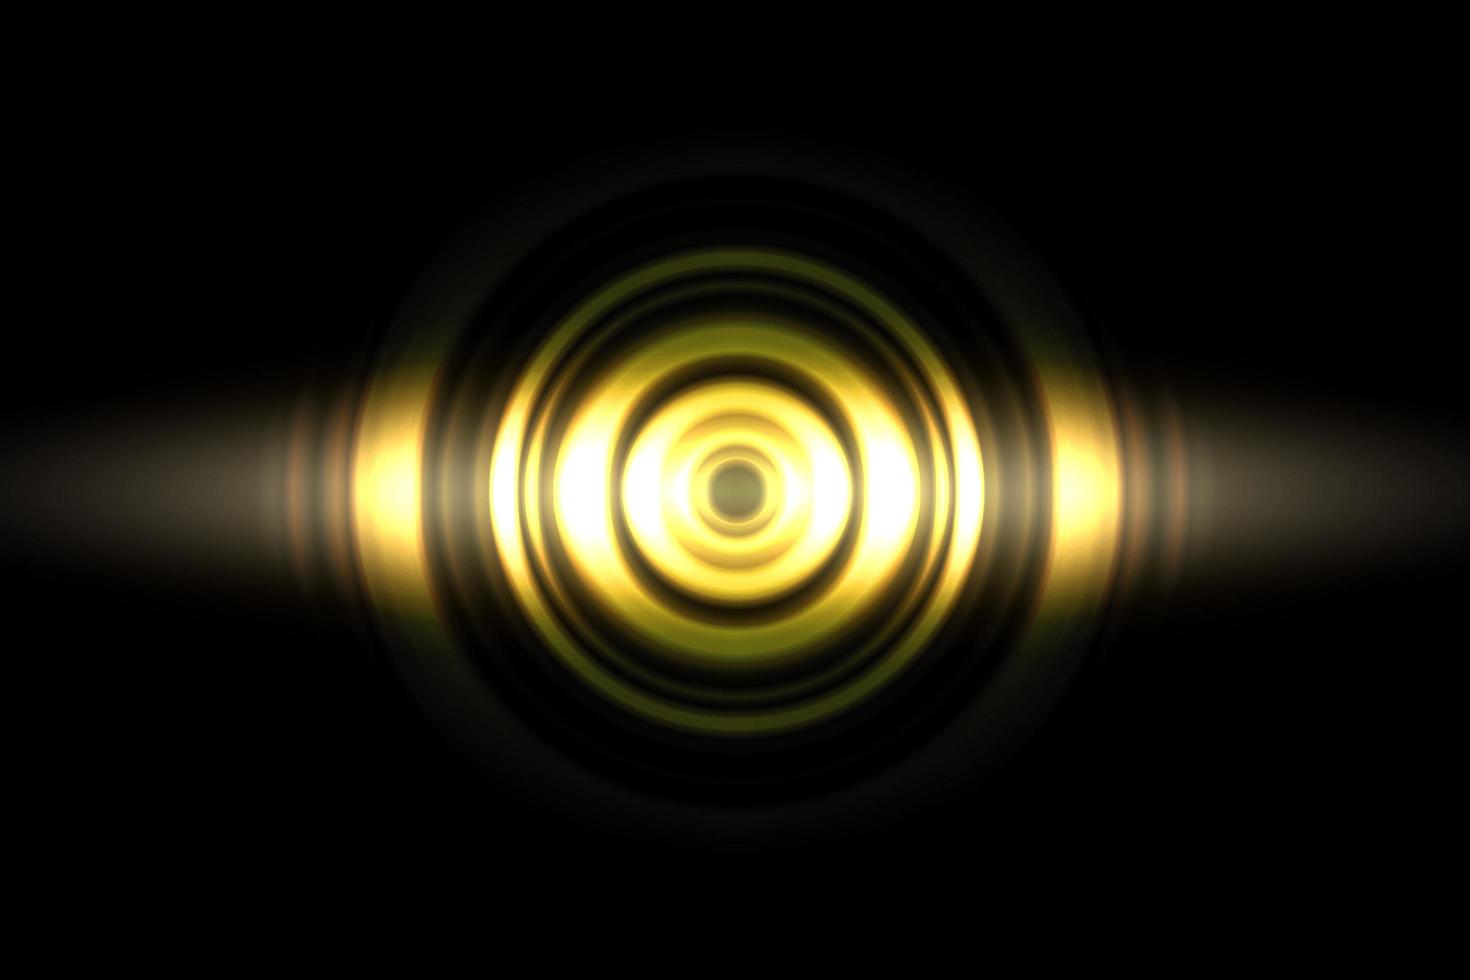 Sound waves oscillating gold light with circle spin abstract background photo